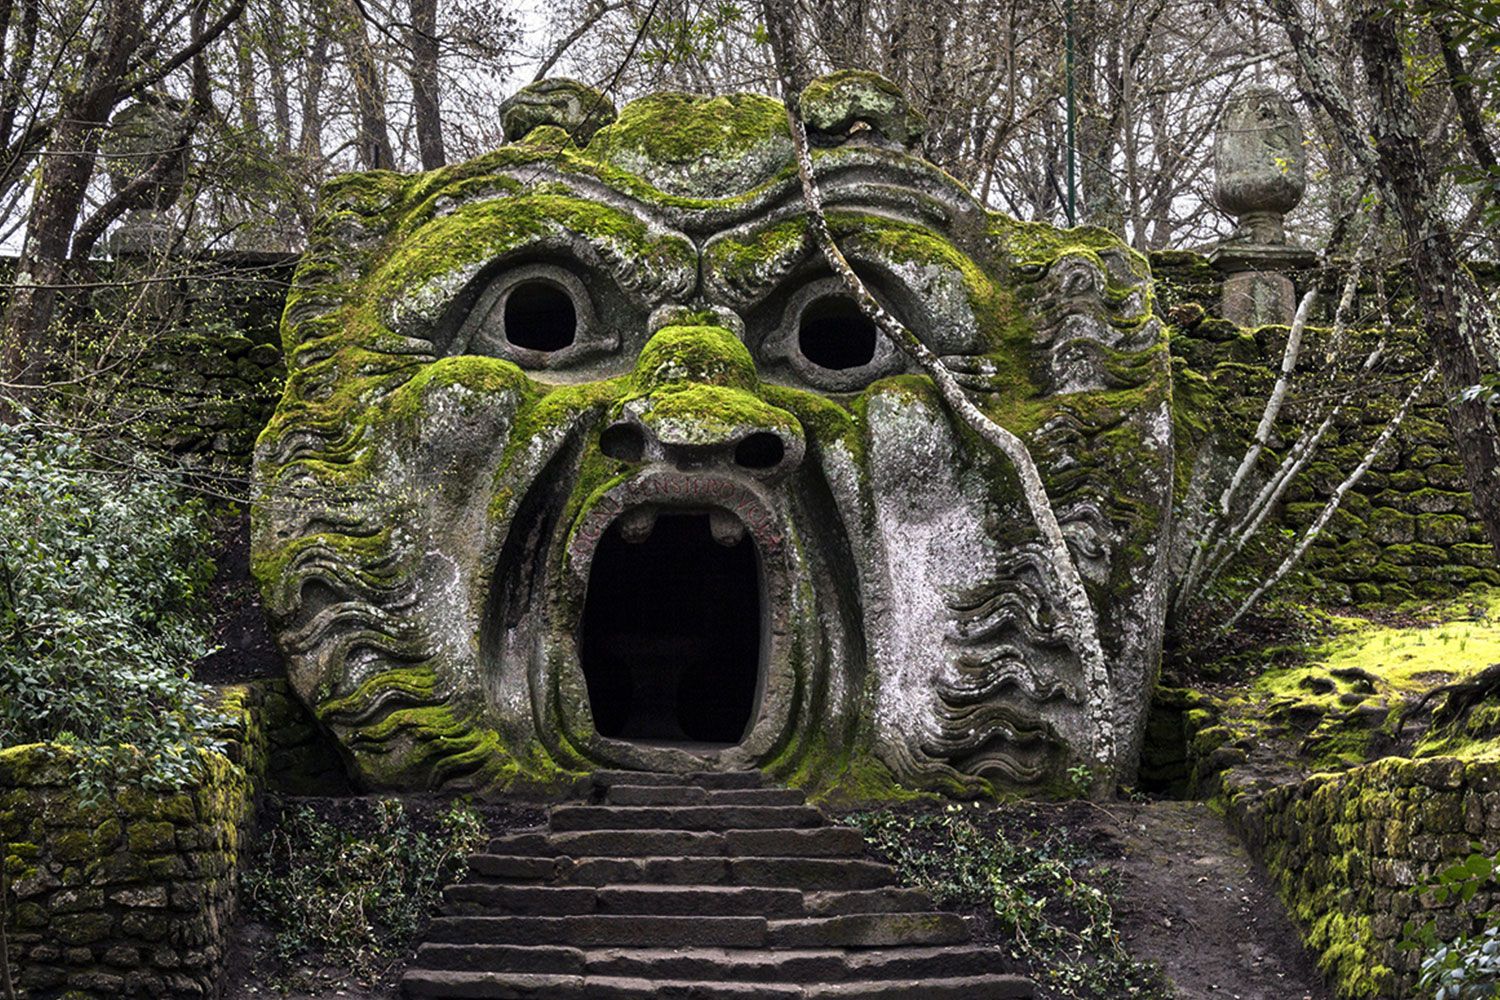 Bomarzo and its Magical Gardens